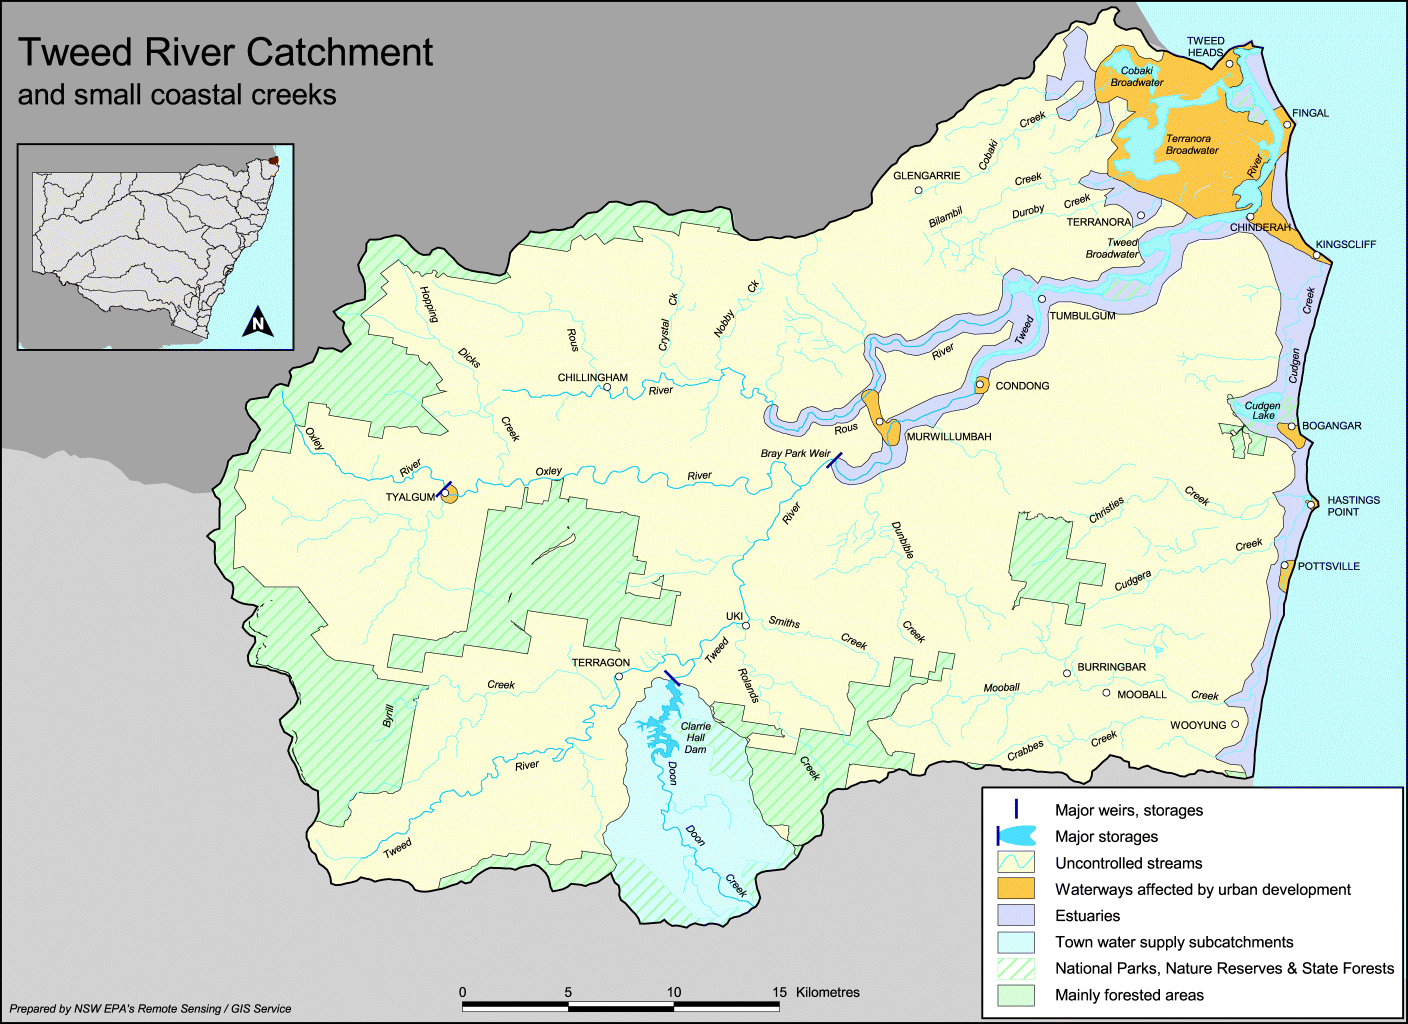 MAP: Tweed River Catchment